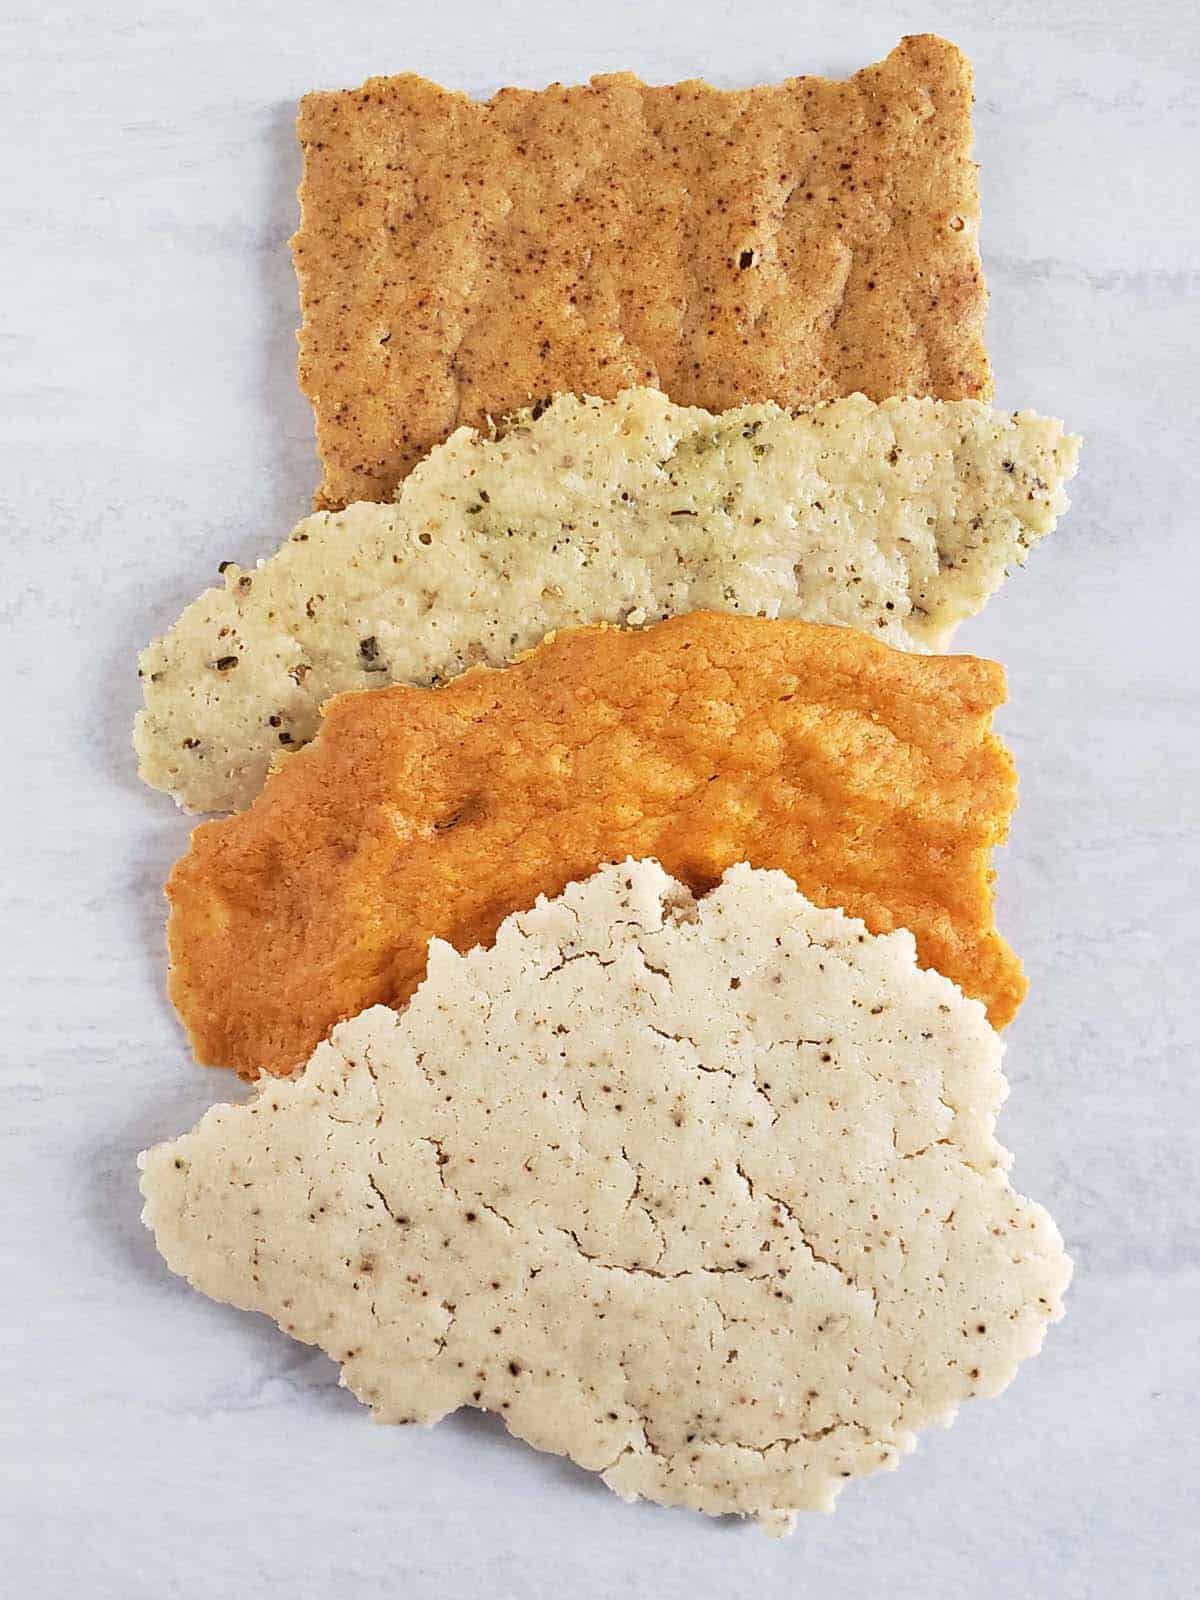 Four different flavors of sourdough crackers on a white surface.